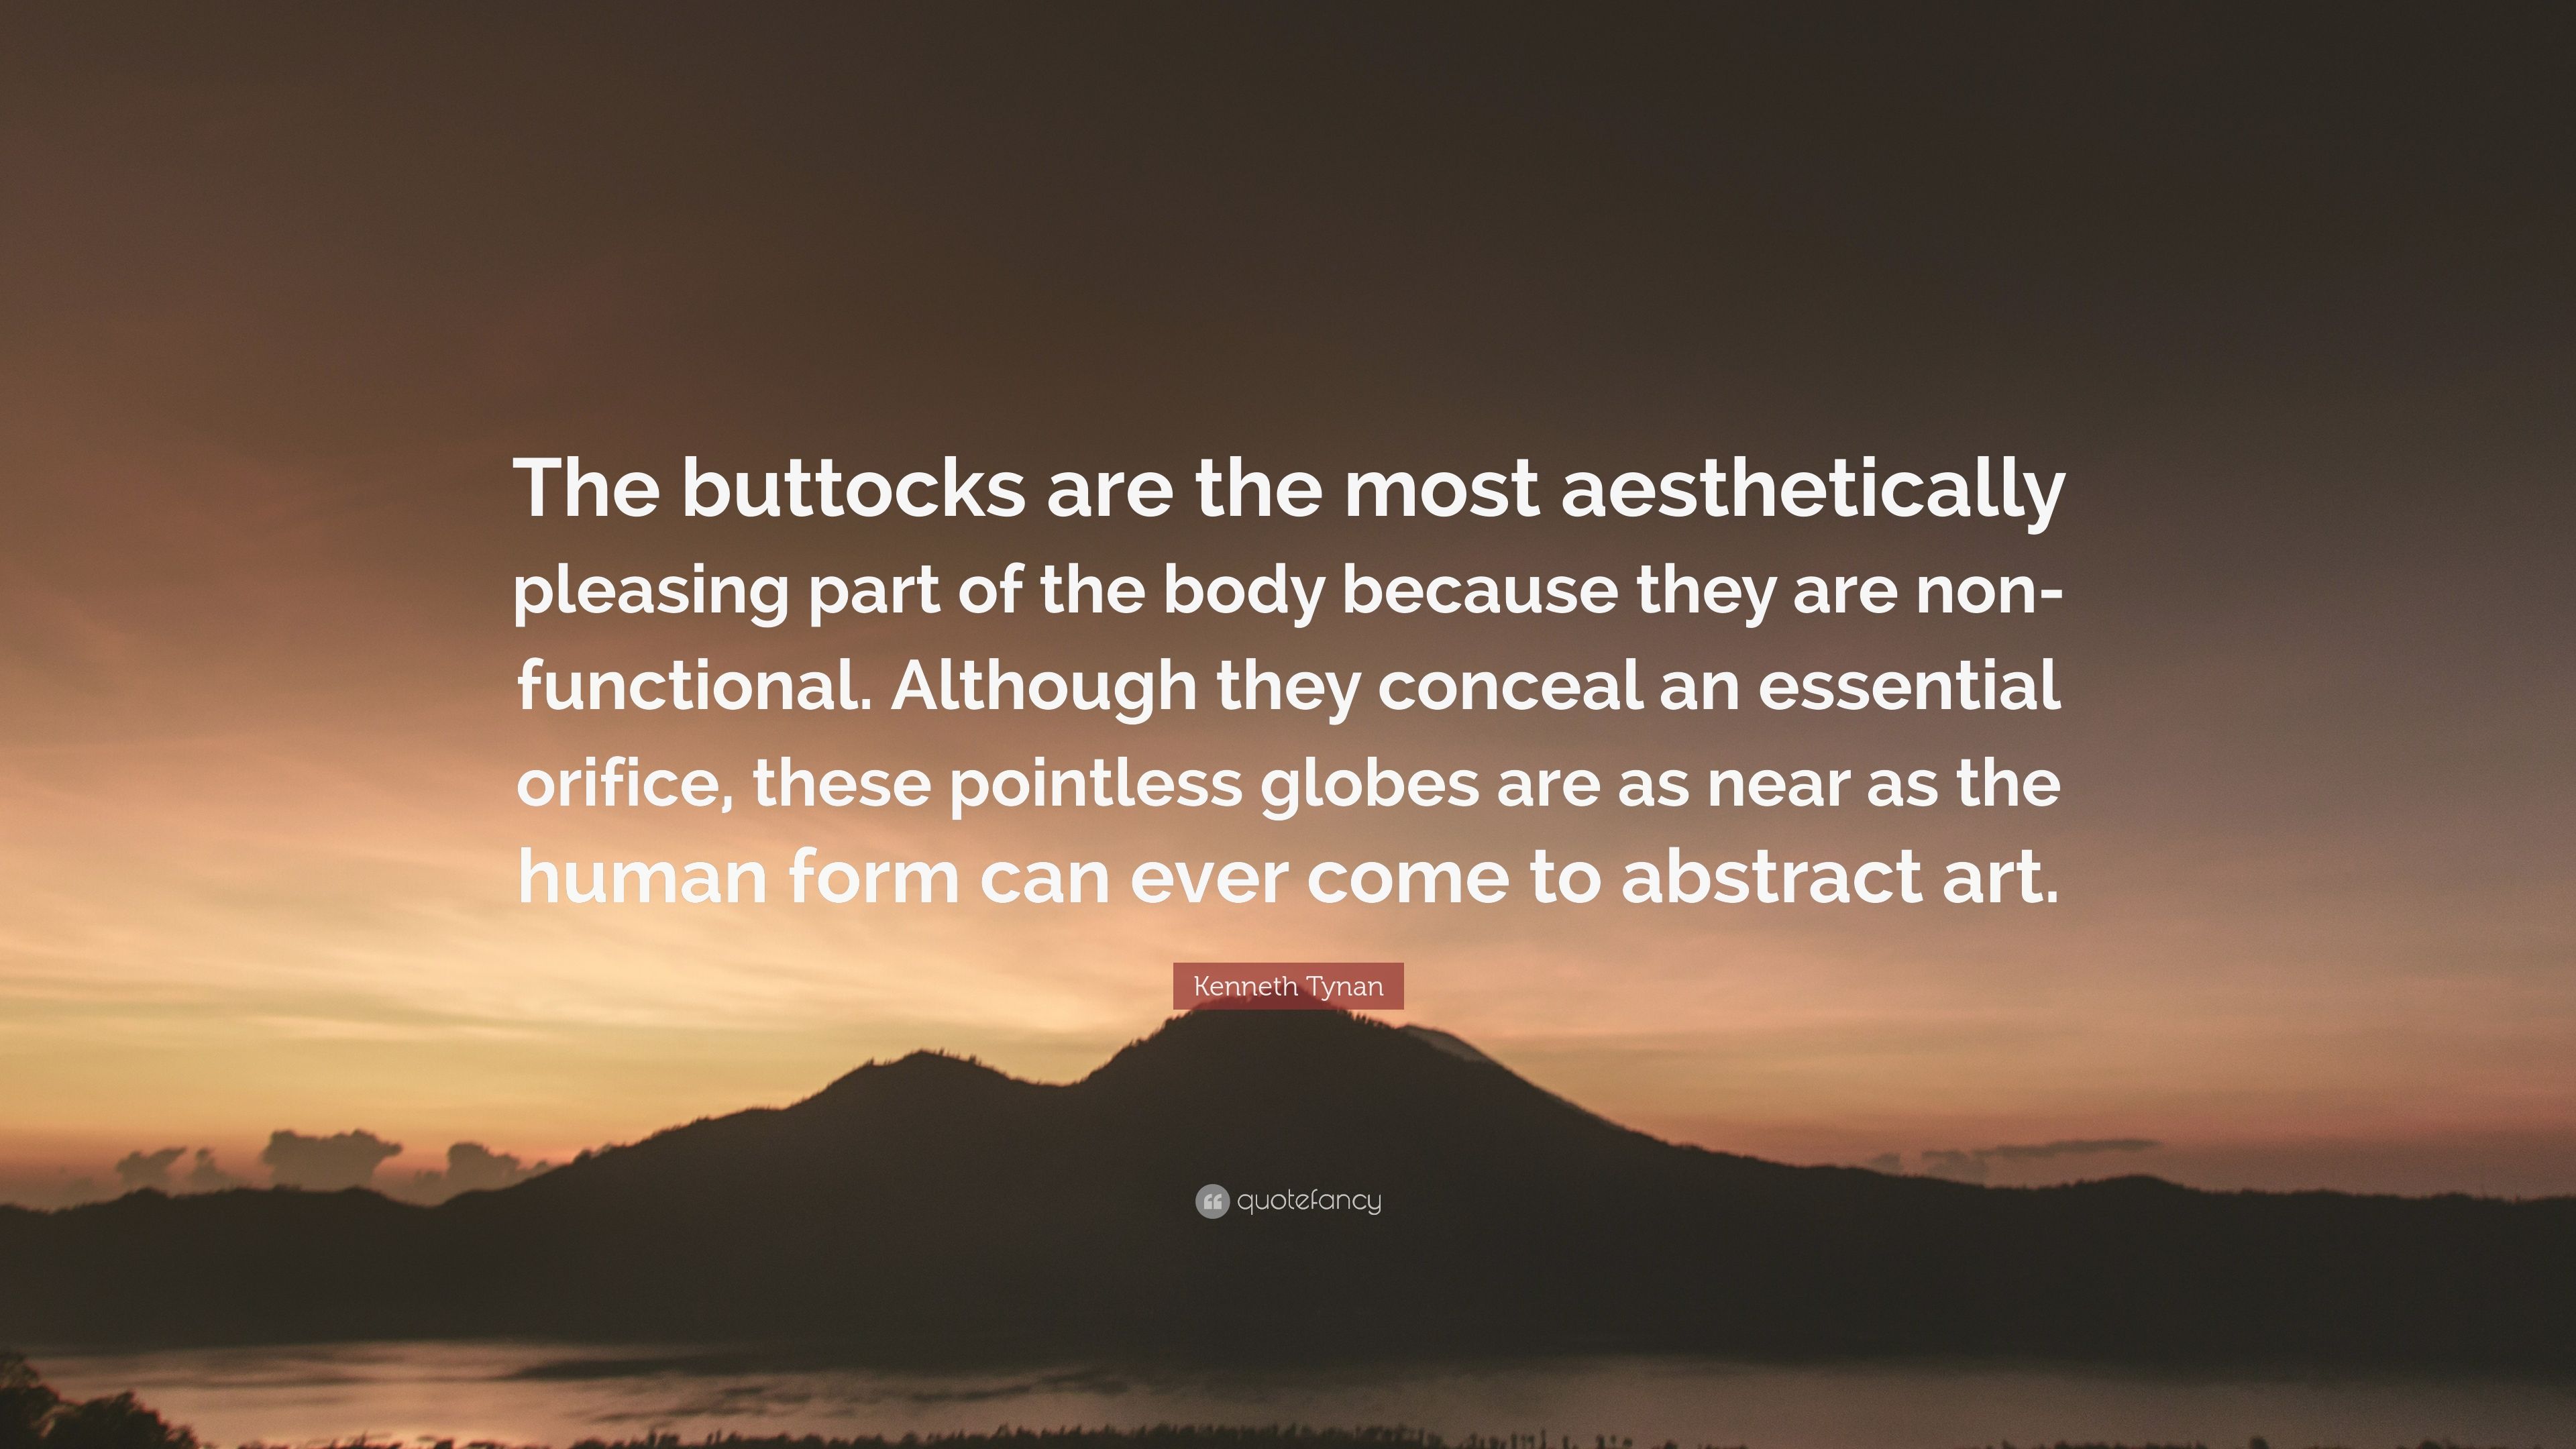 Kenneth Tynan Quote: “The buttocks are the most aesthetically